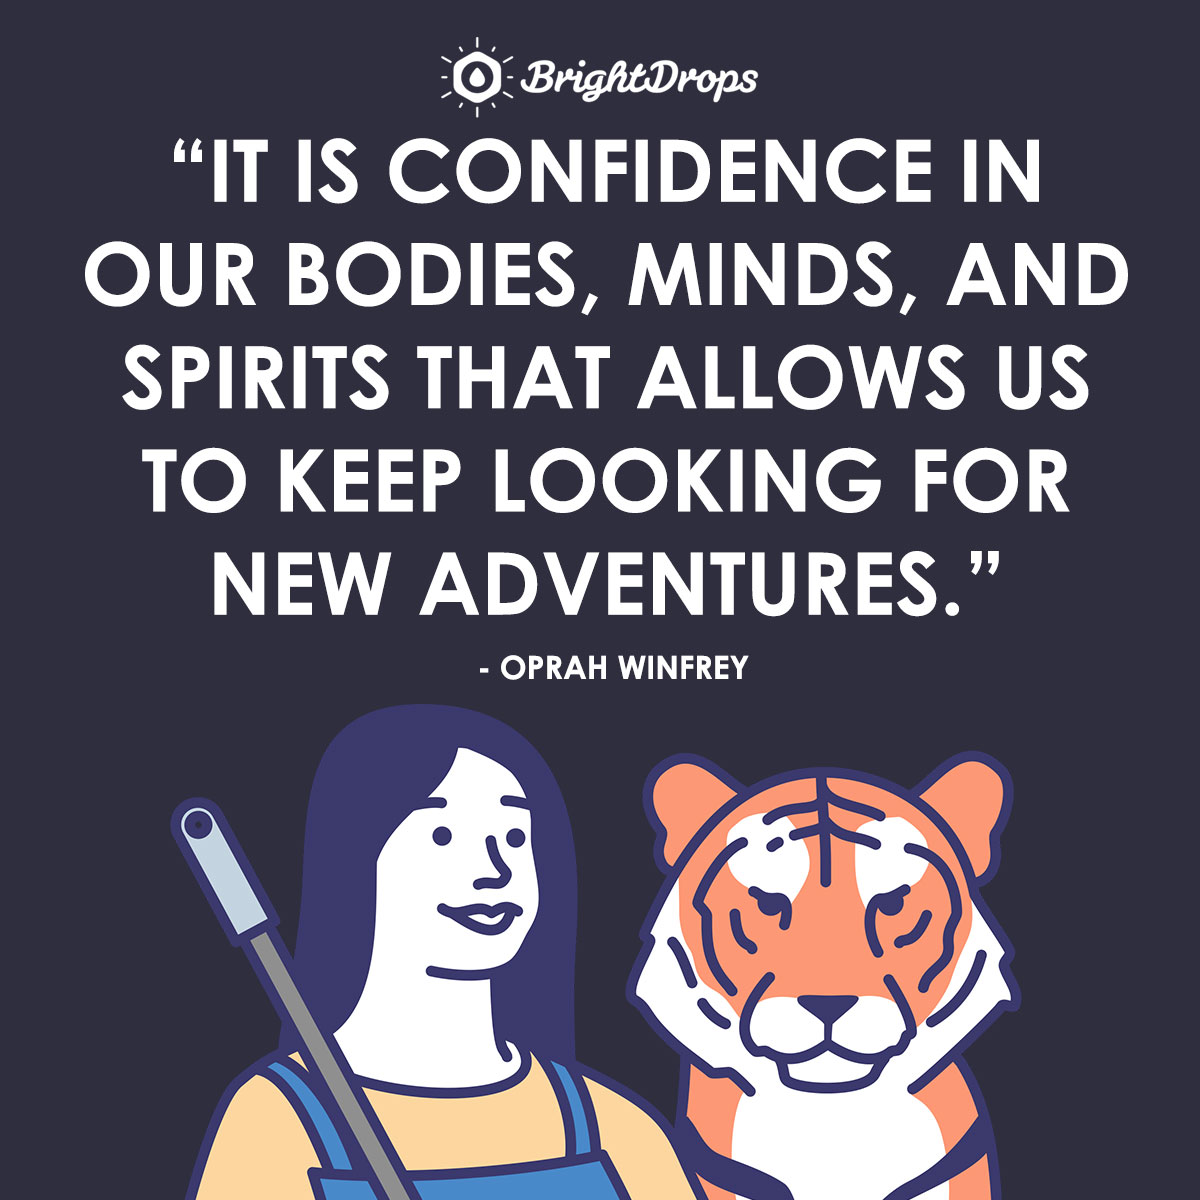 It is confidence in our bodies, minds, and spirits that allows us to keep looking for new adventures. - Oprah Winfrey